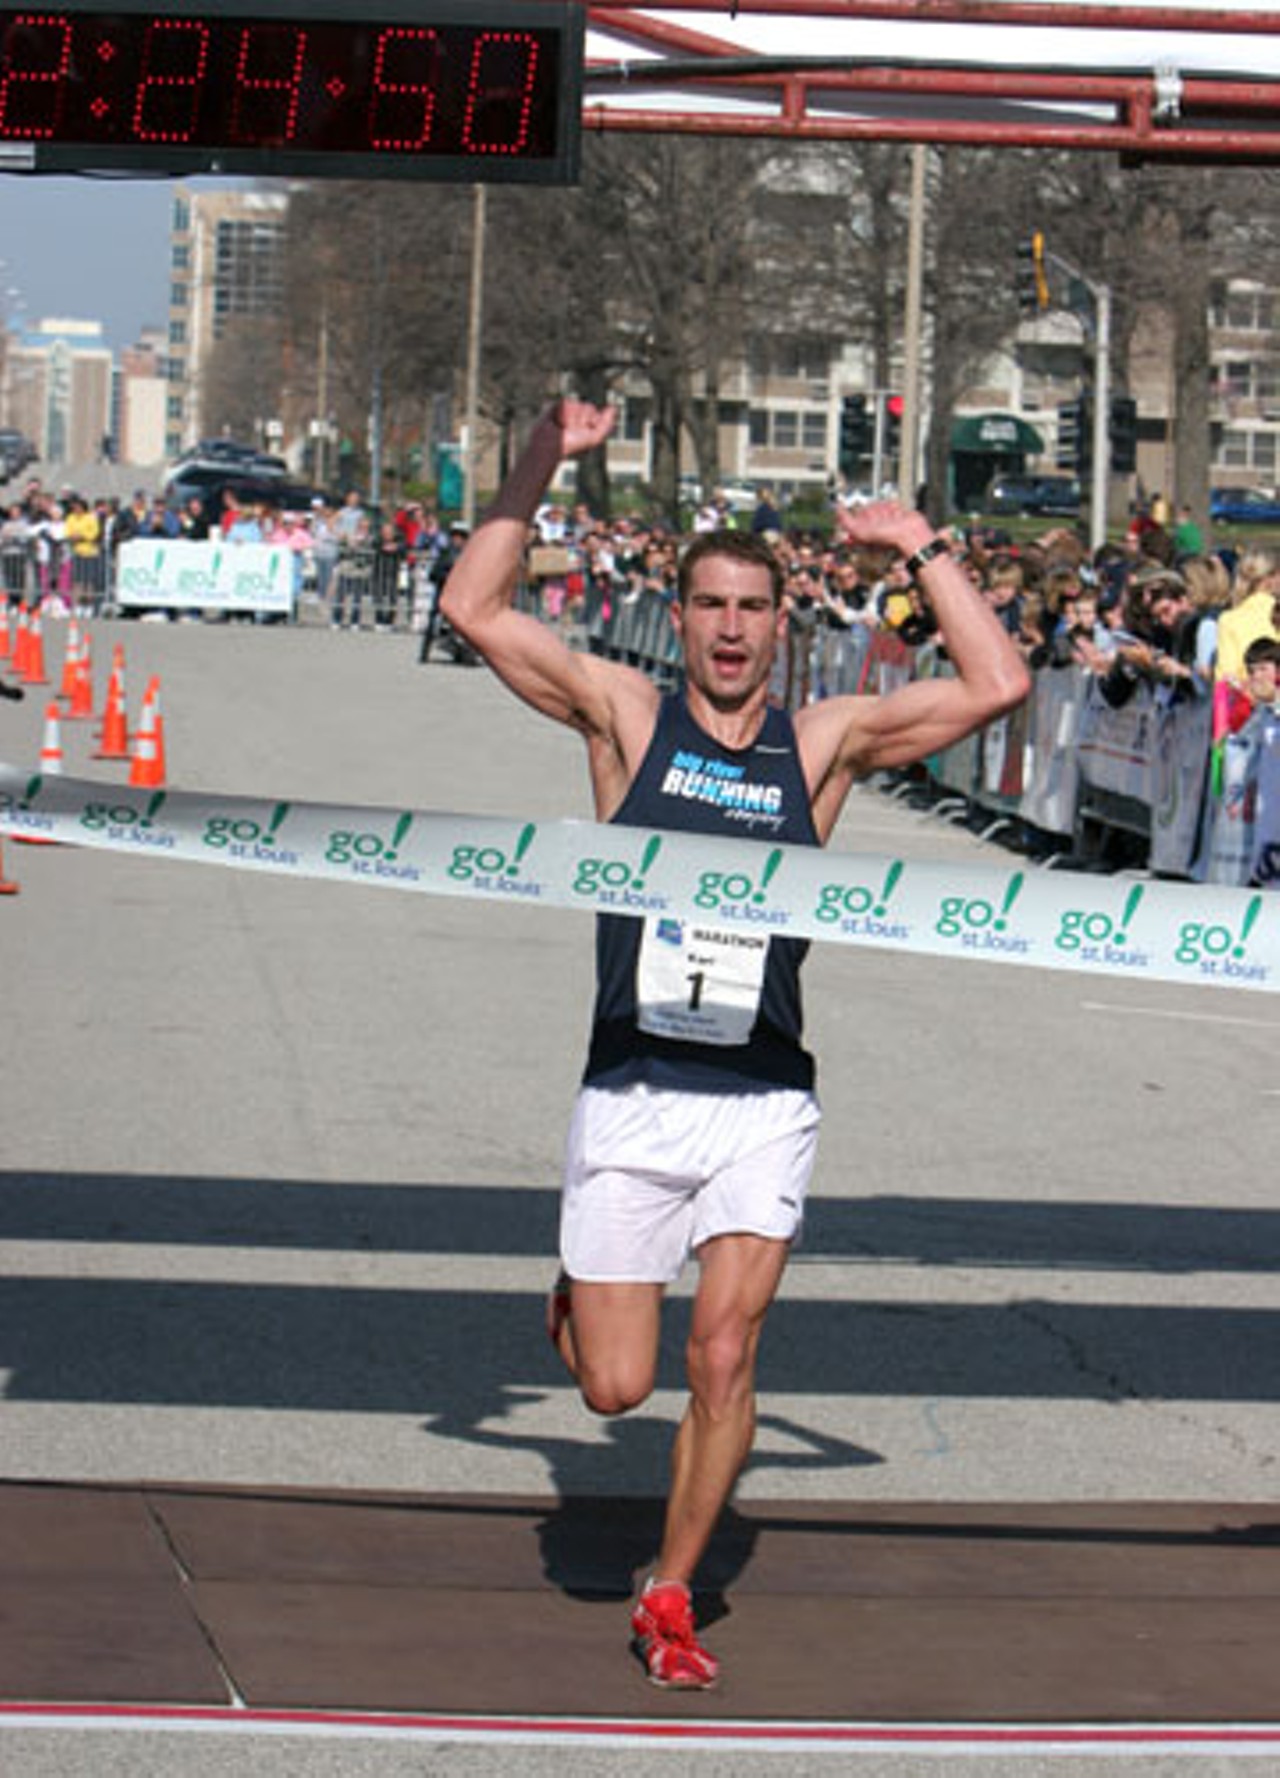 Karl Gilpin wins the 2008 Go! St. Louis Marathon for the second consecutive year.